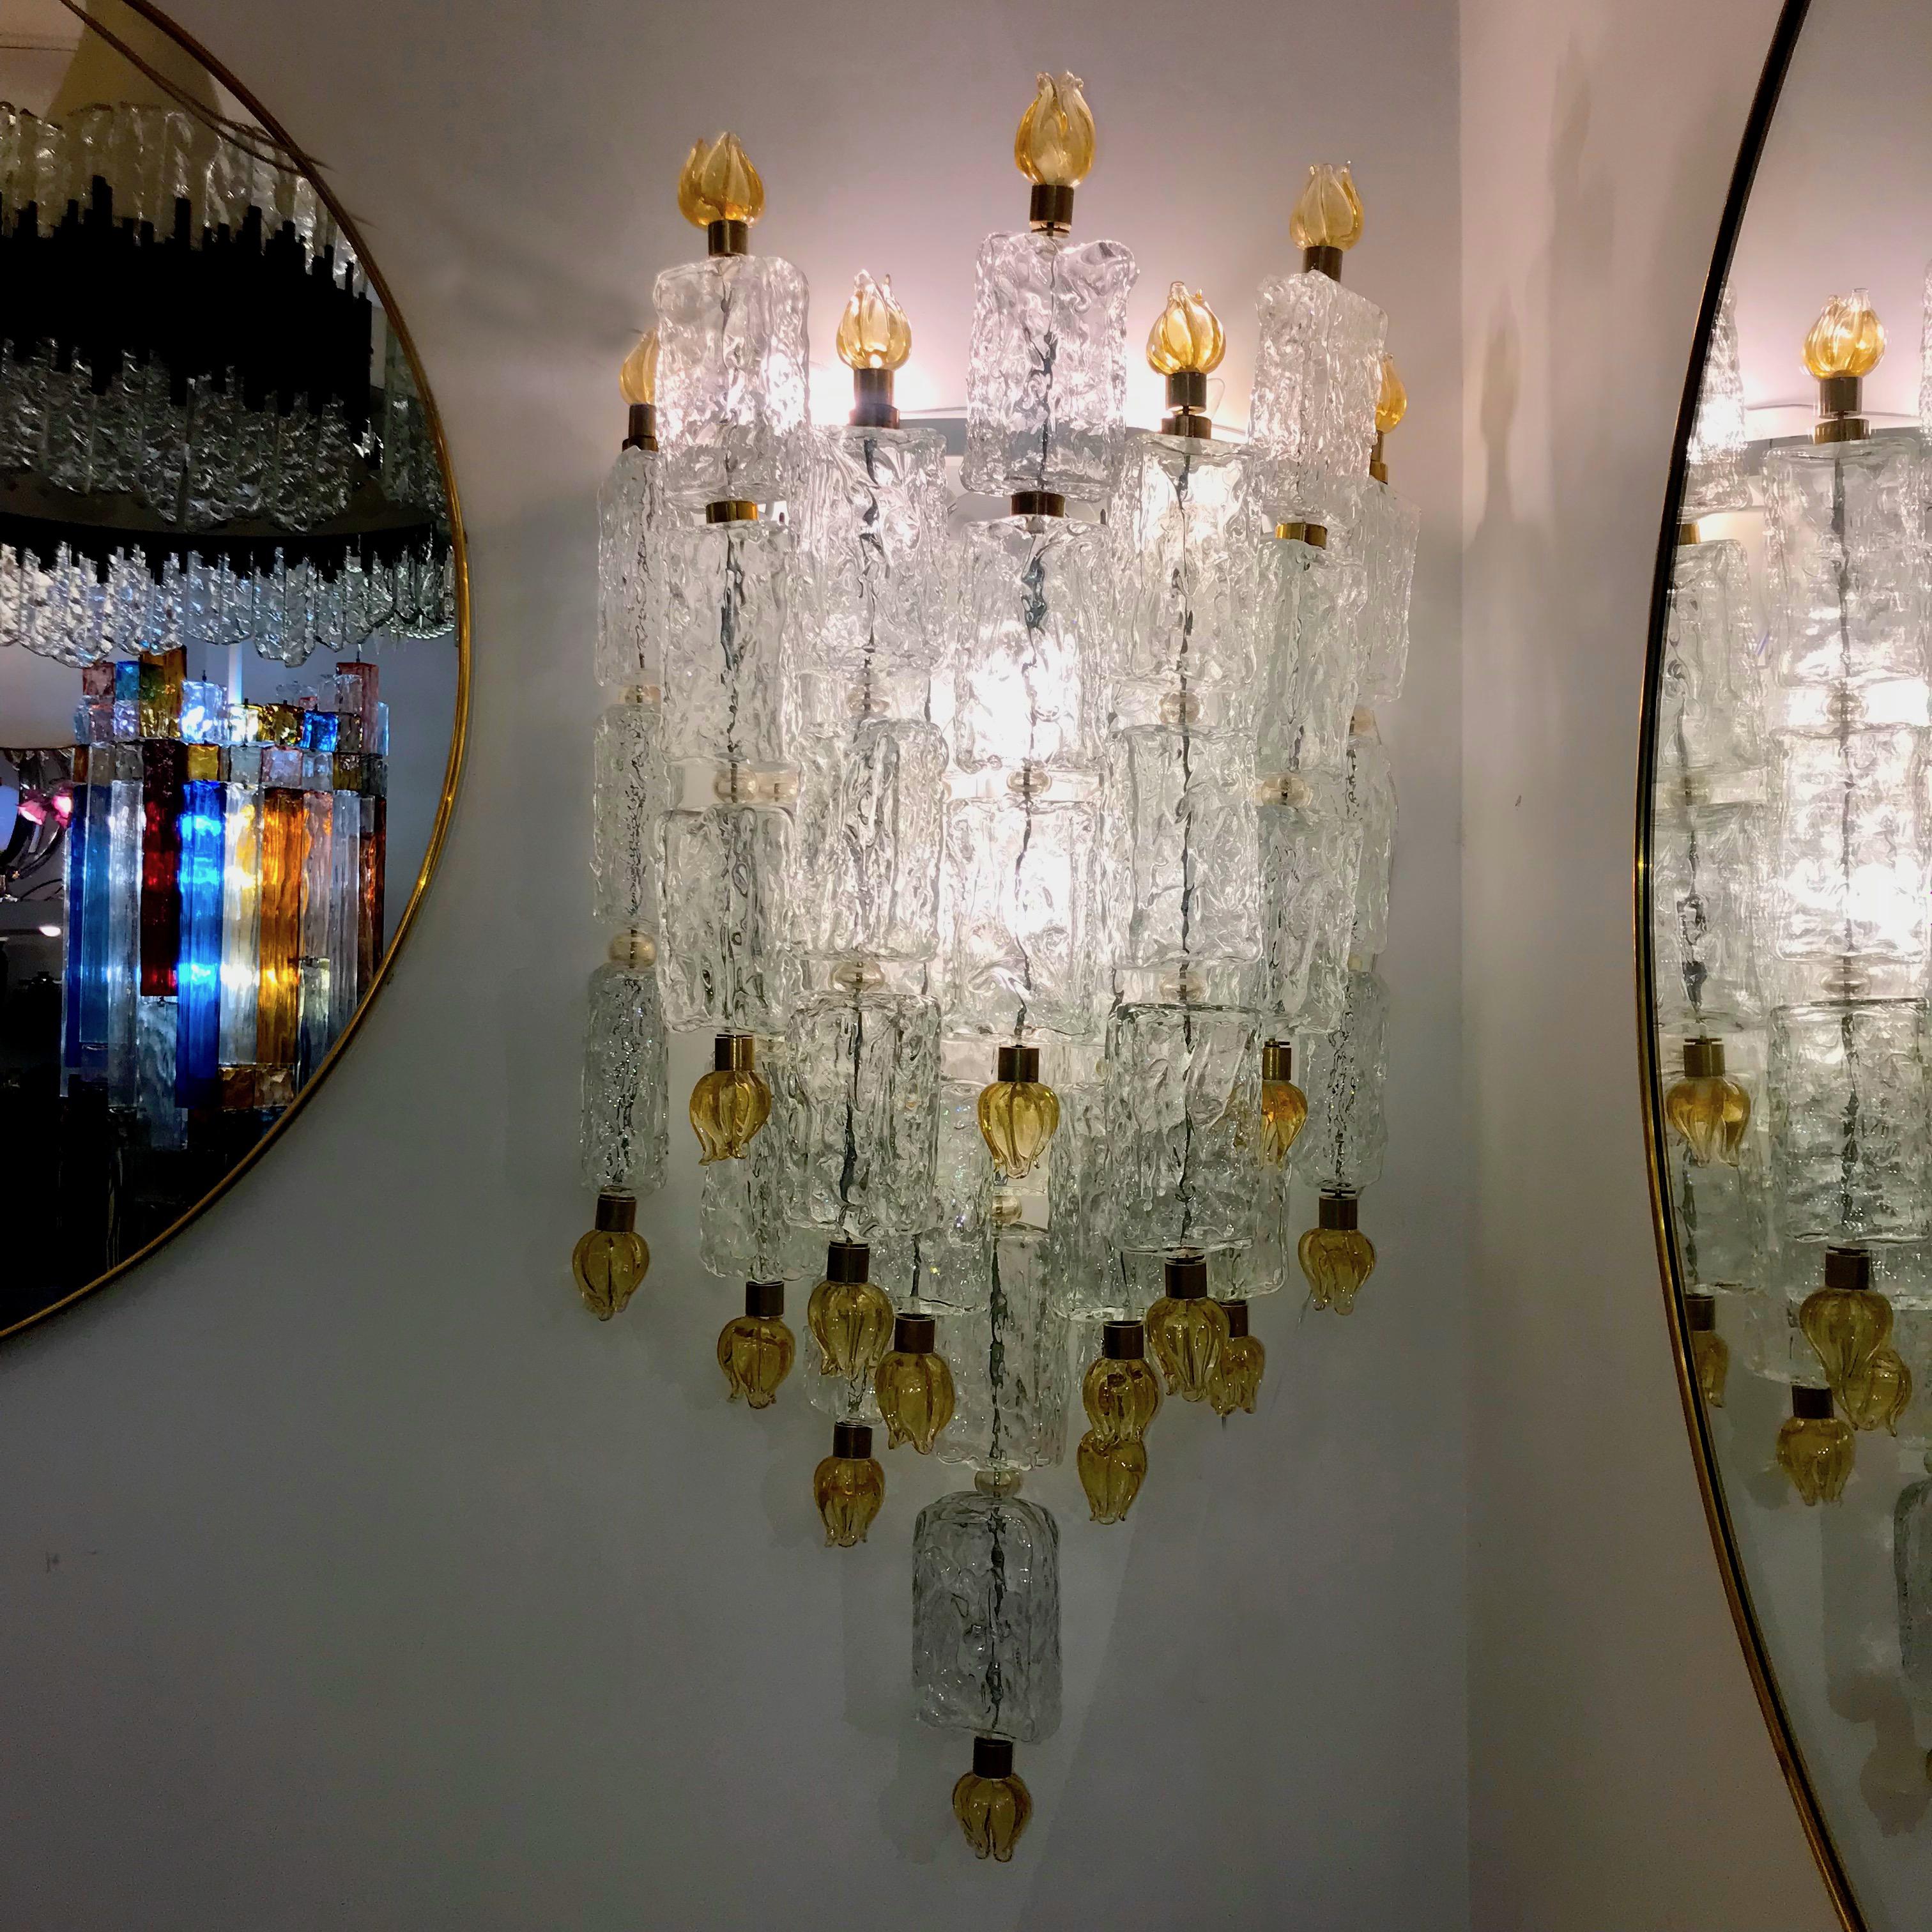 Pair of Barovier & Toso Glass Blocks with Gold Tulip Sconces, 1940 For Sale 3